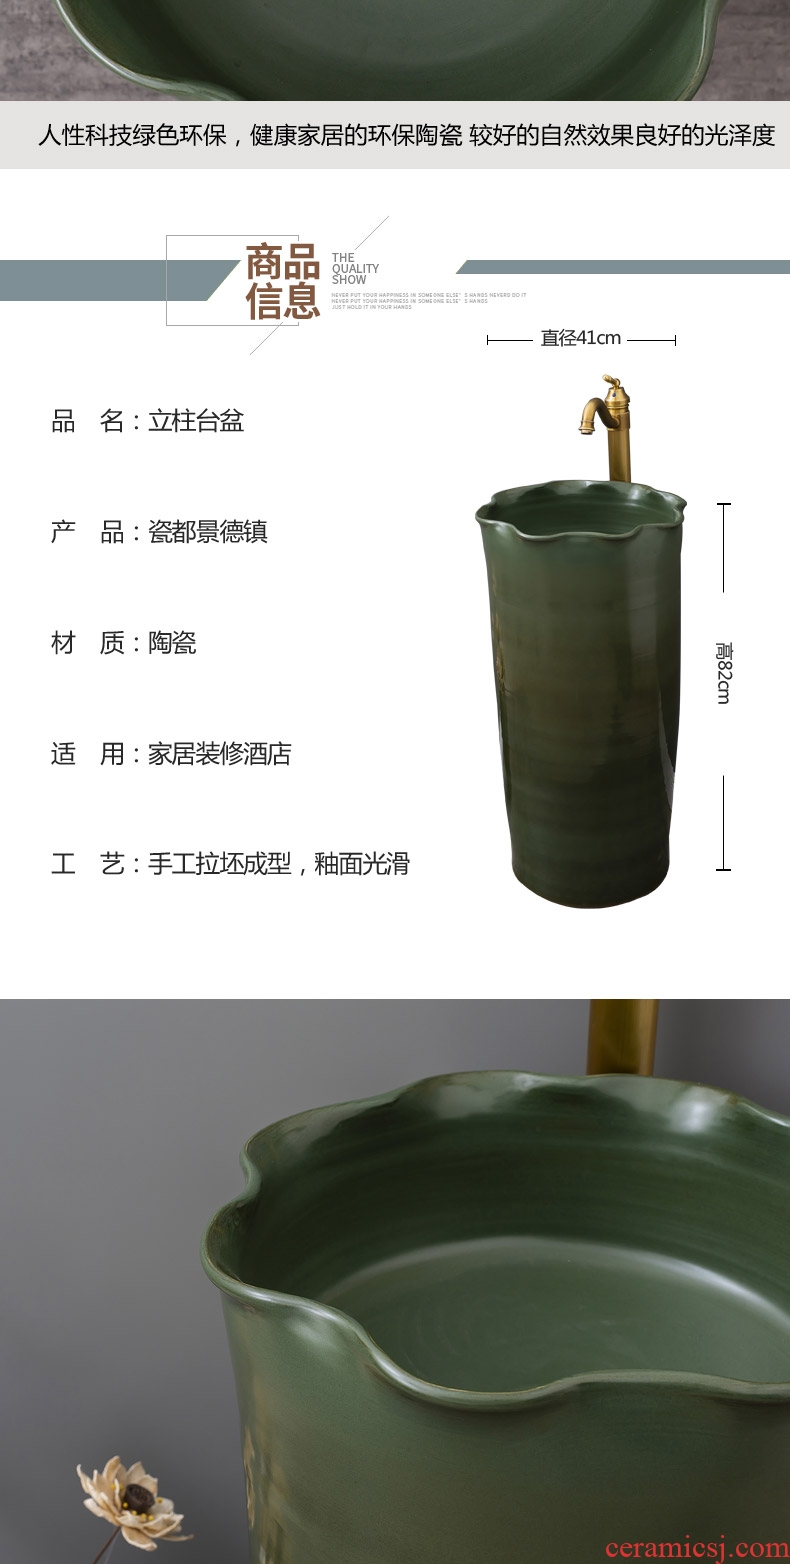 Basin of Chinese style restoring ancient ways ceramic pillar floor one is suing patio lavatory toilet lavabo